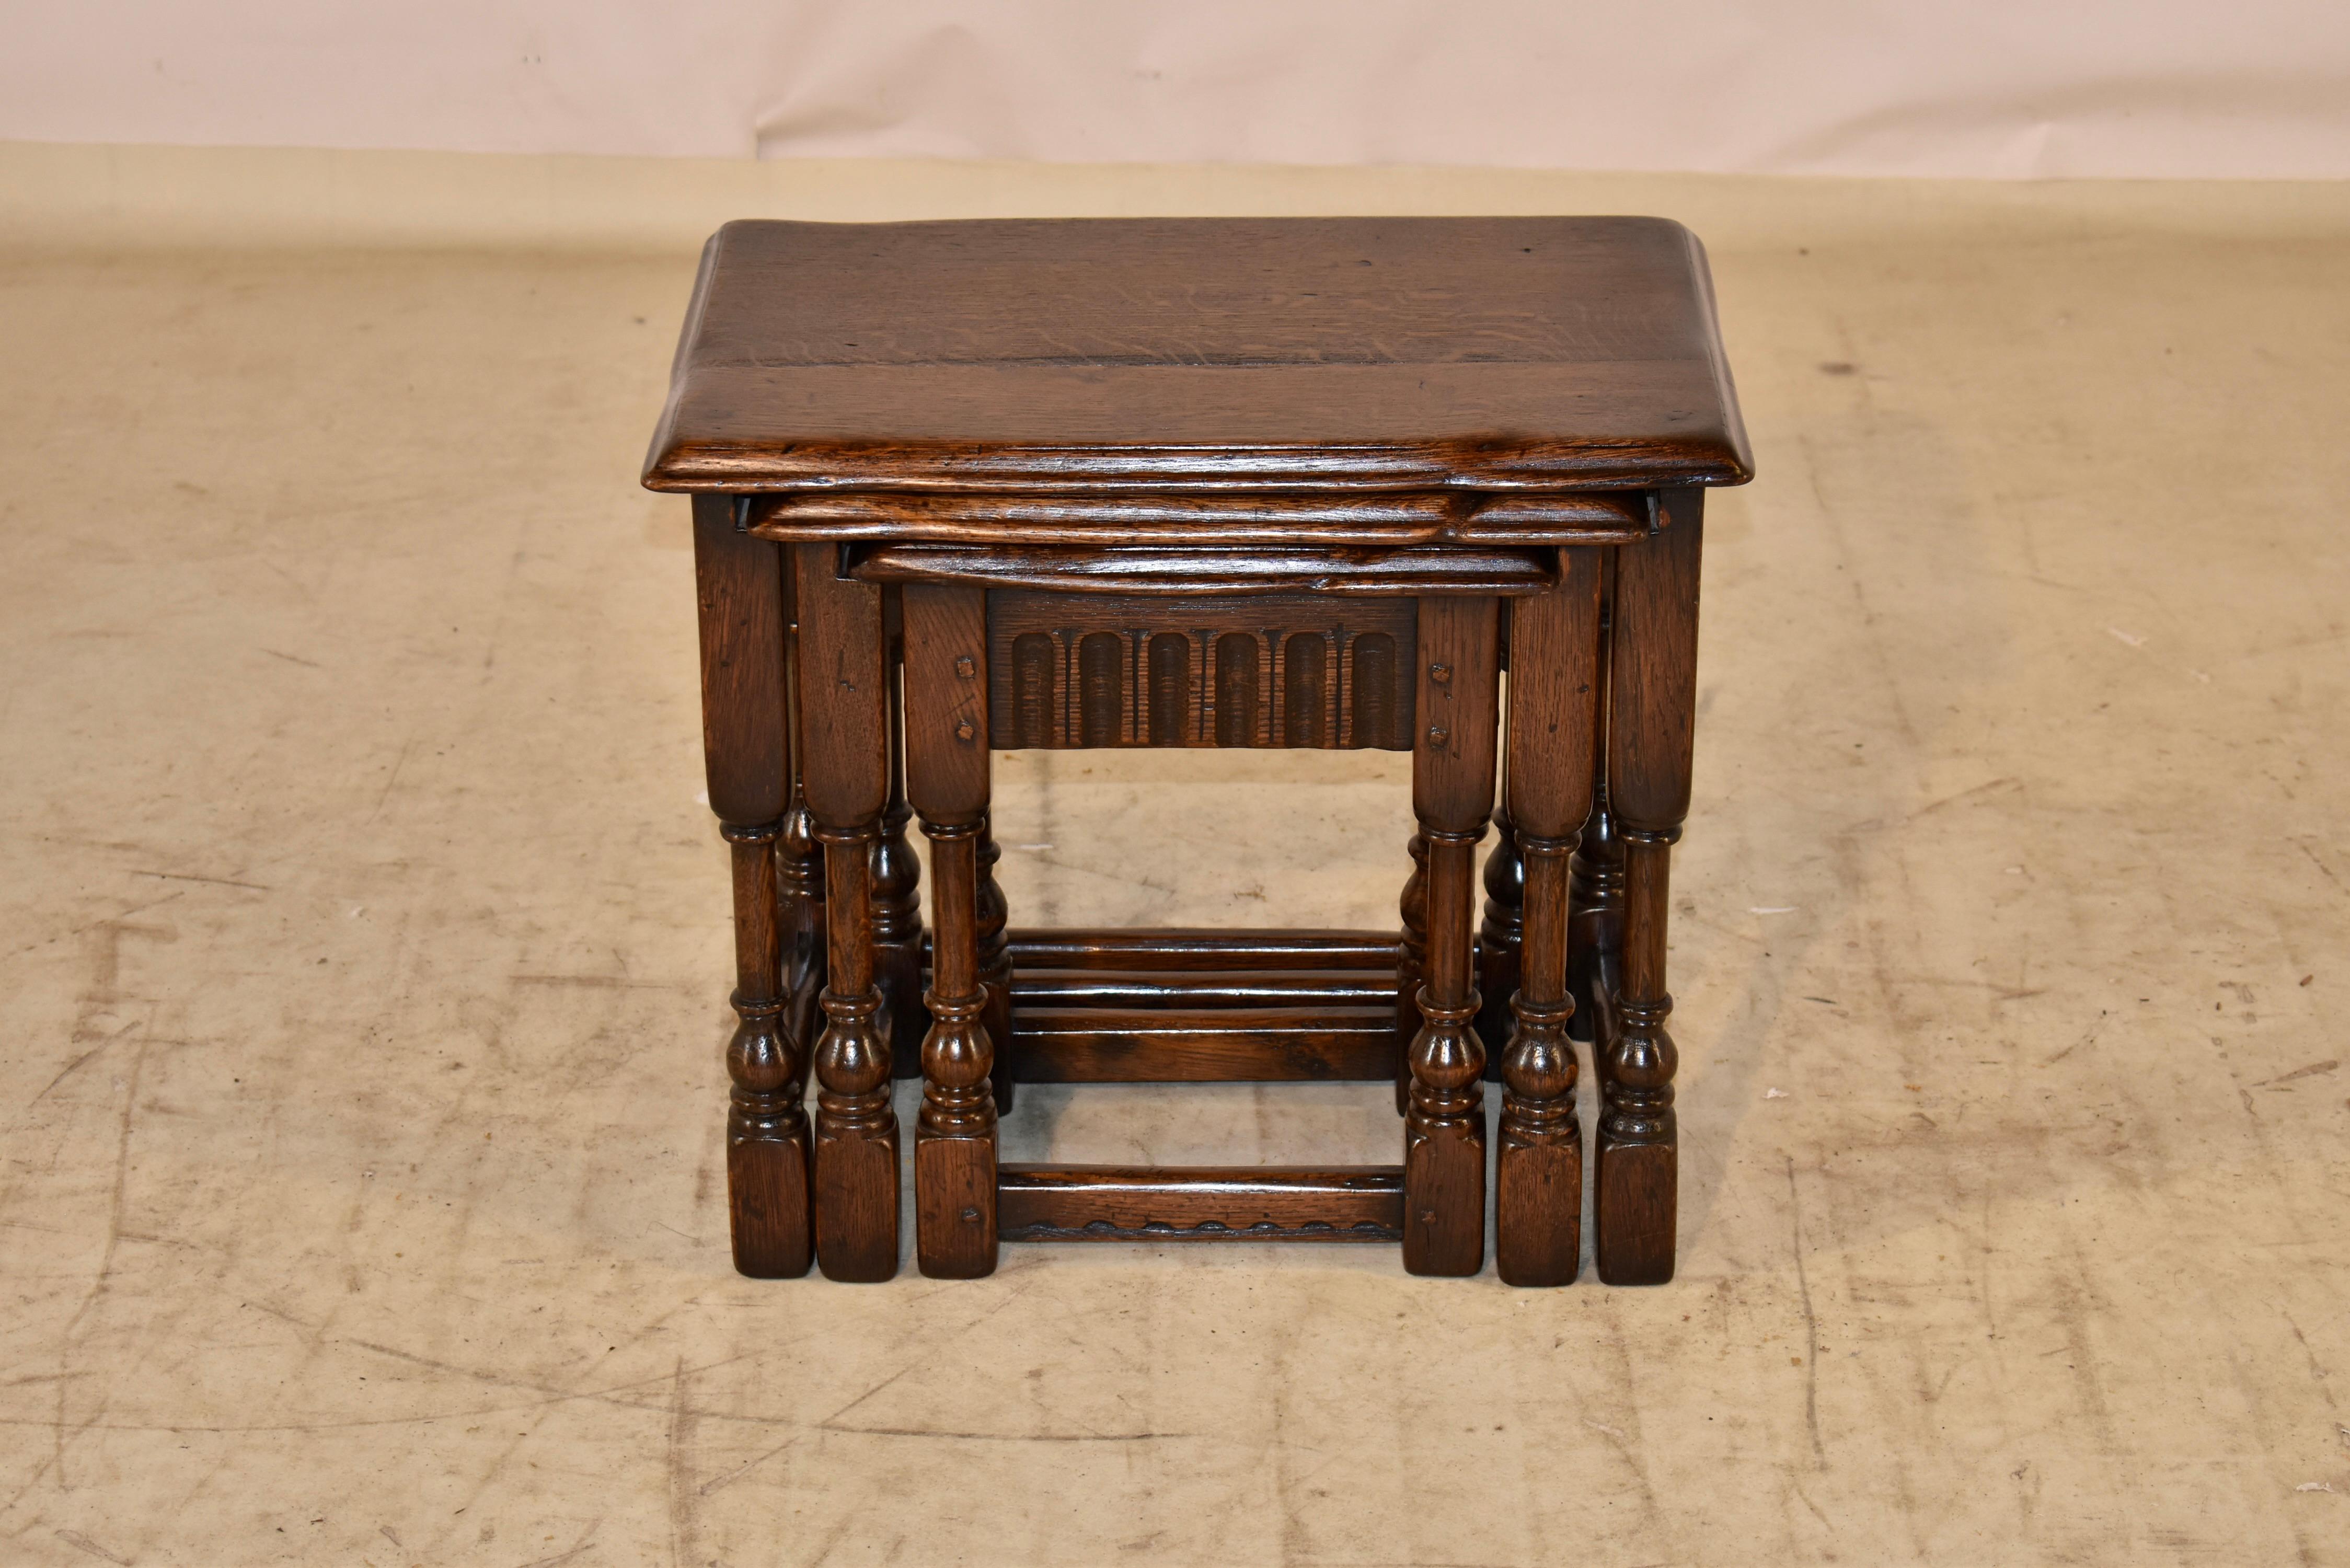 Set of three oak nesting side tables from England.  The tops have gorgeous patina and graining, and have eased beveled edges.  The aprons have hand carved decoration and all of the tables are supported on hand turned legs, joined by simple